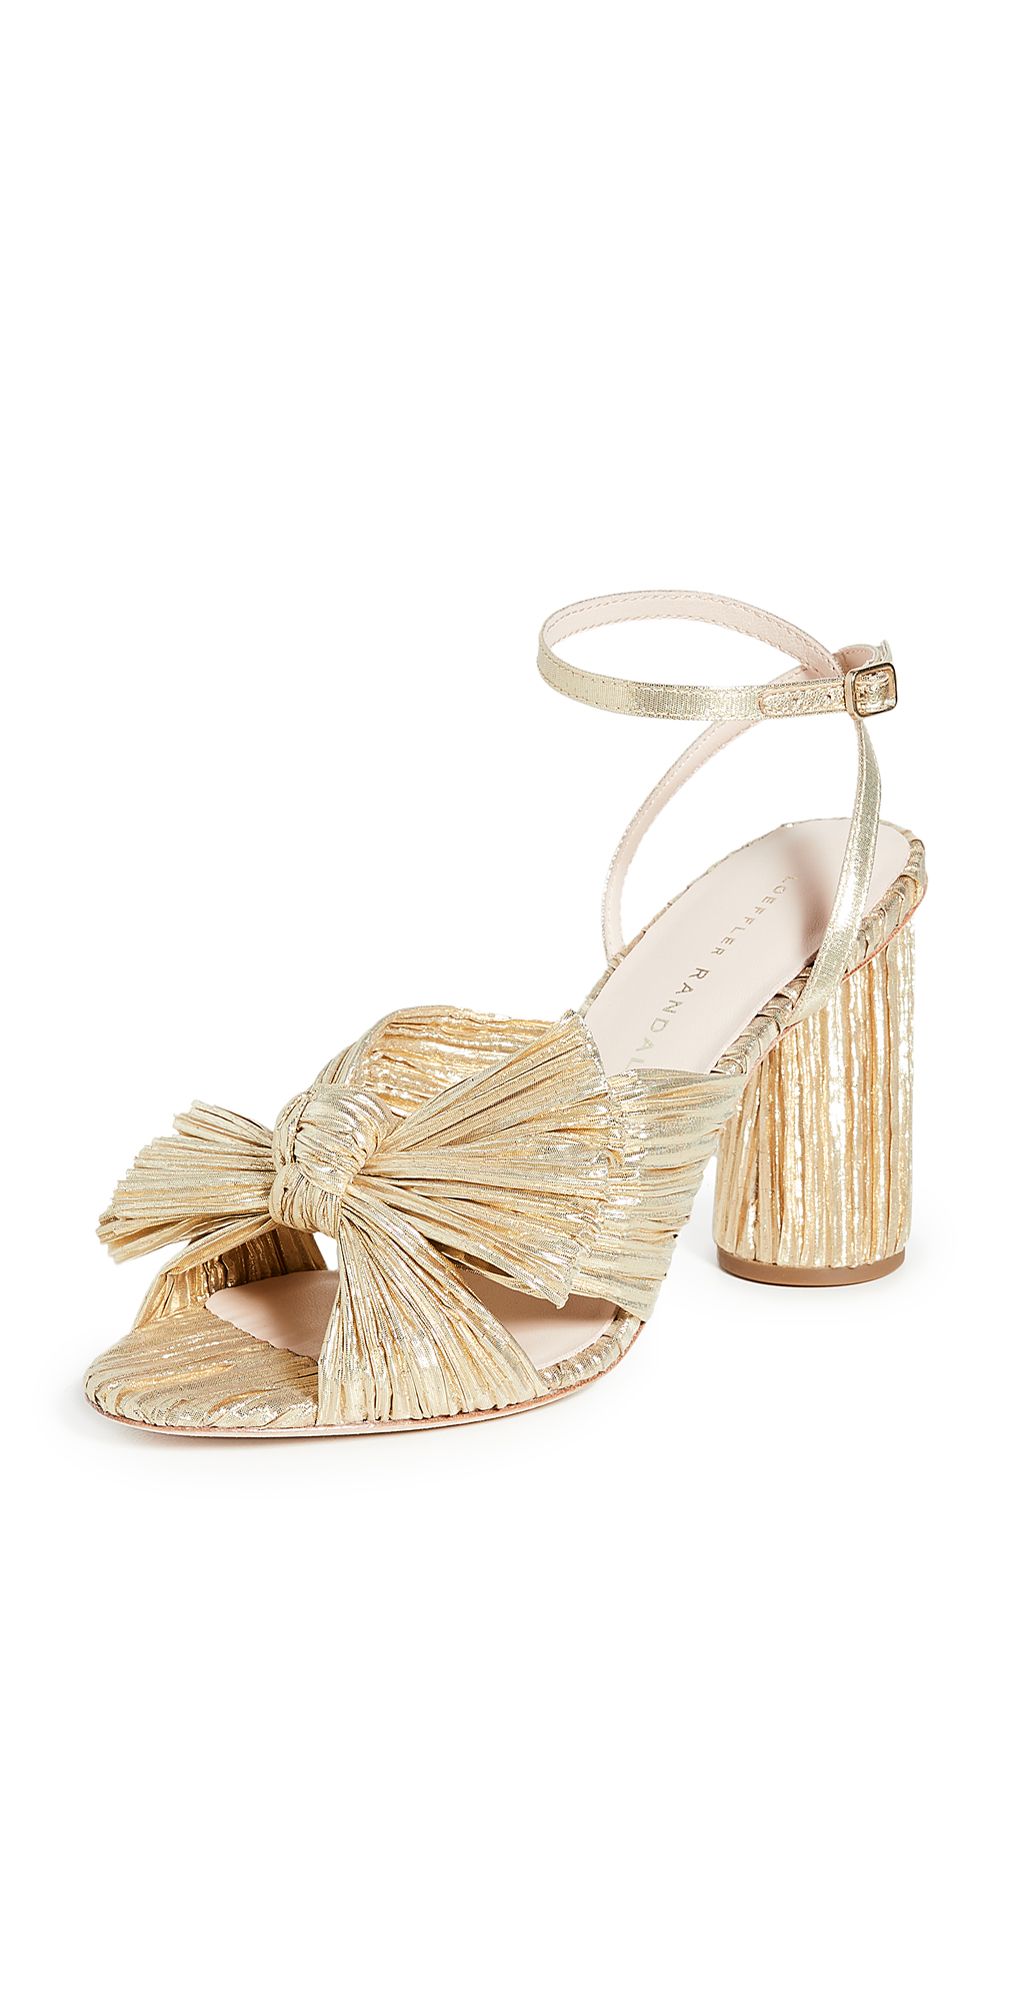 Loeffler Randall Camellia Gold Pleated Bow Heel with Ankle Strap | SHOPBOP | Shopbop